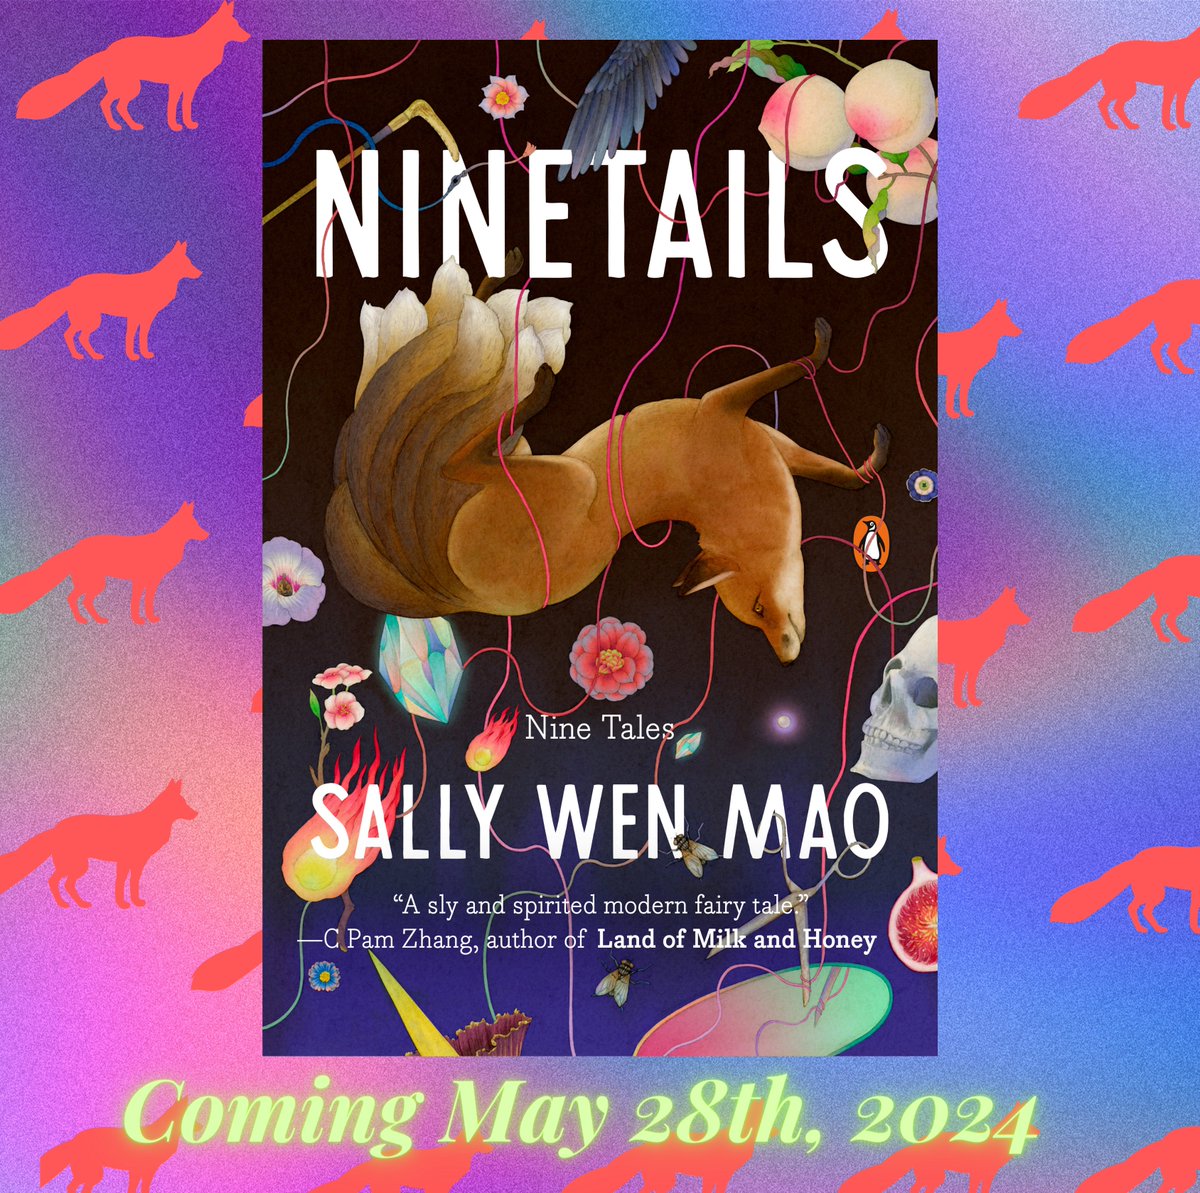 2024 is the YEAR of NINETAILS! Sharing the cover now of my debut fiction/story collection, NINETAILS: NINE TALES @PenguinBooks. Eight years since I began writing these tales...finally entering the world in the Year of the Dragon 🦊🐉🦊 Pre-order here: penguinrandomhouse.com/books/730459/n…